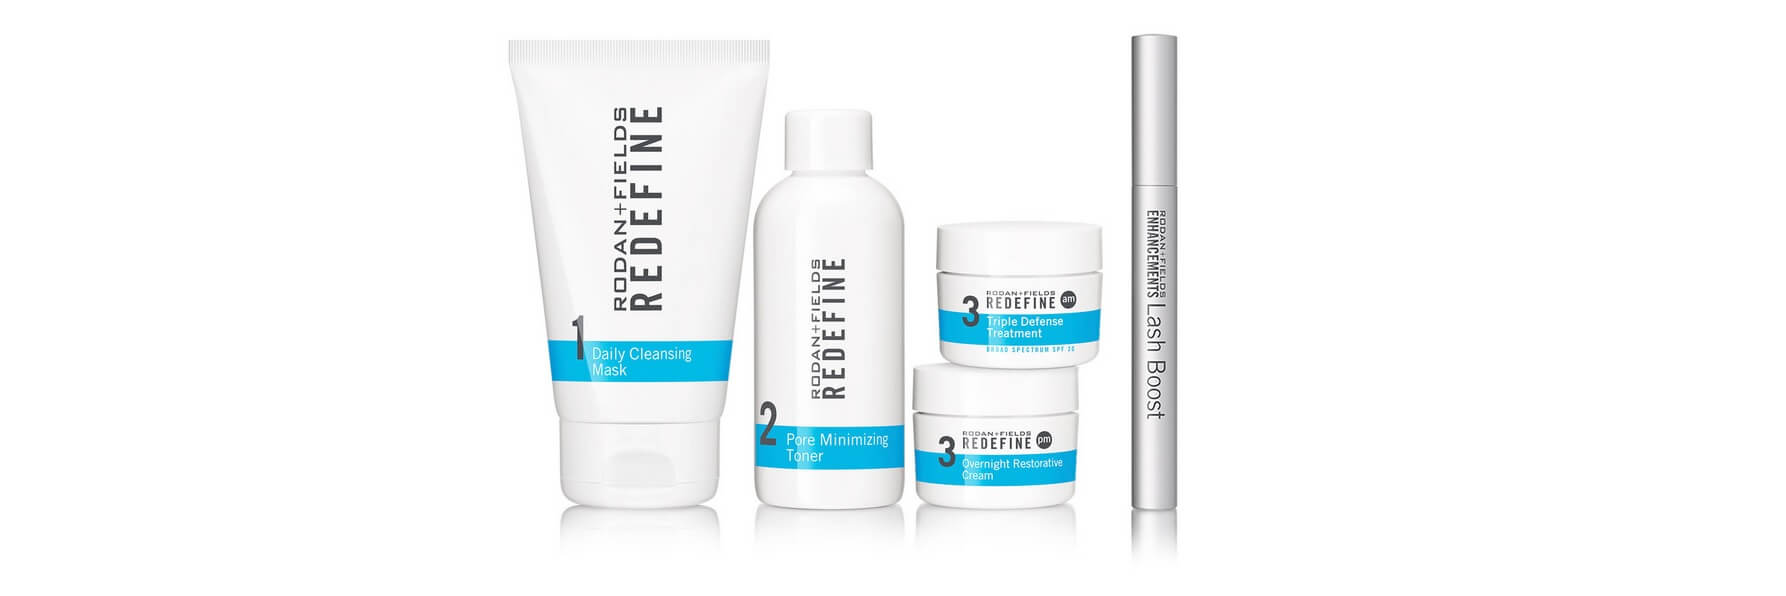 Rodan and Fields Review Is It Worth The Investment?